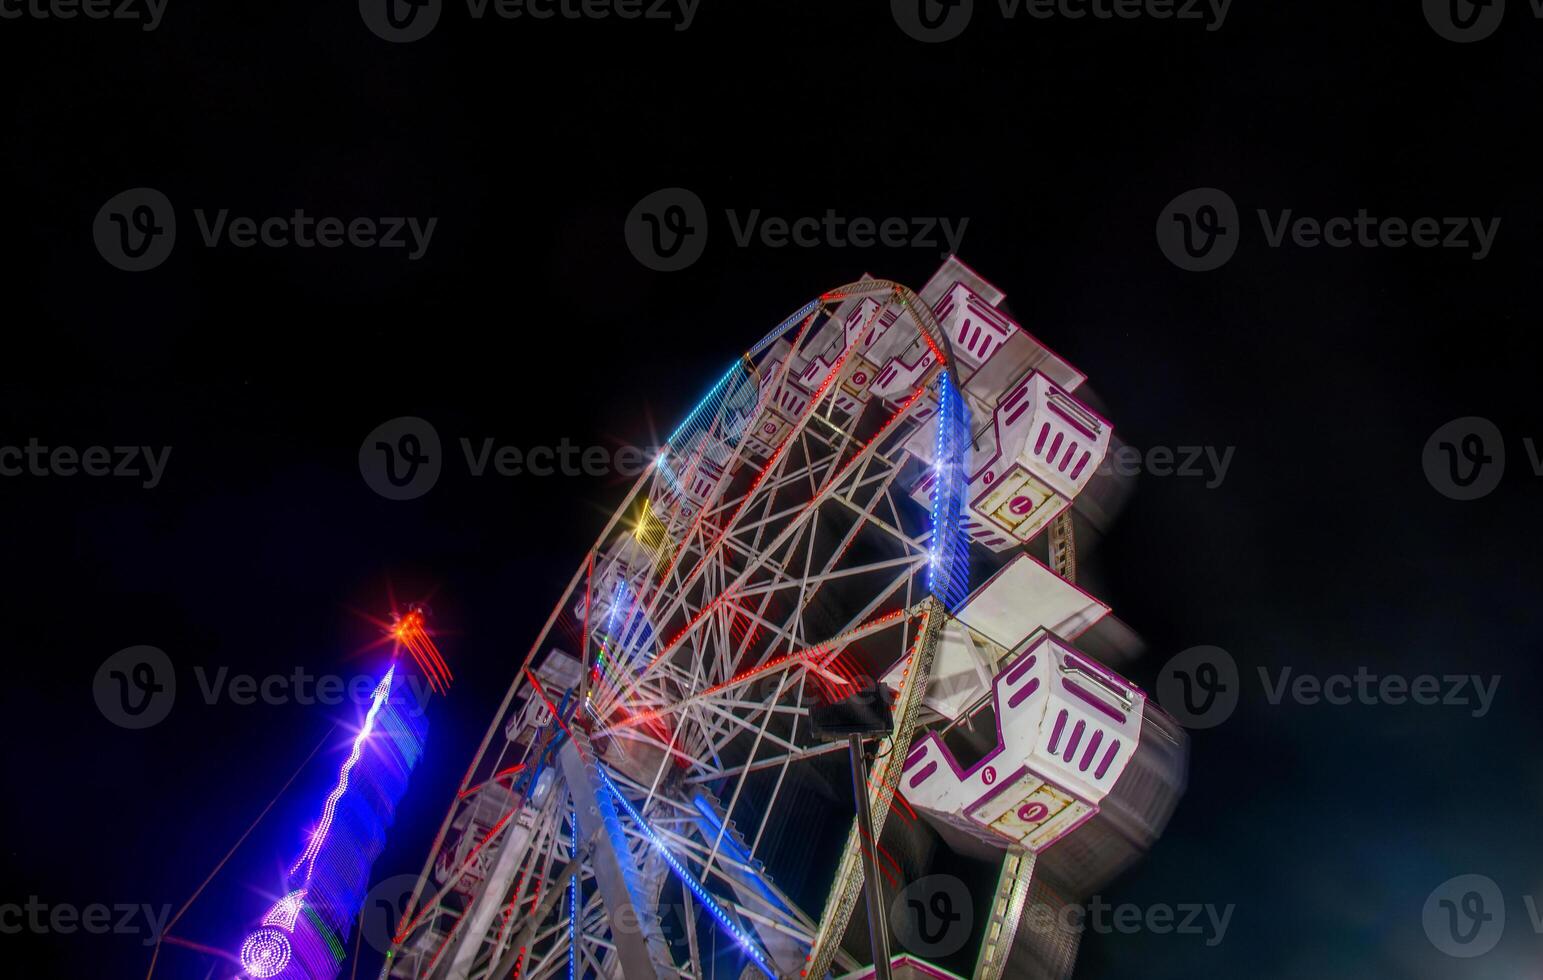 Mexican fair with rides and lights at night, with space for text photo